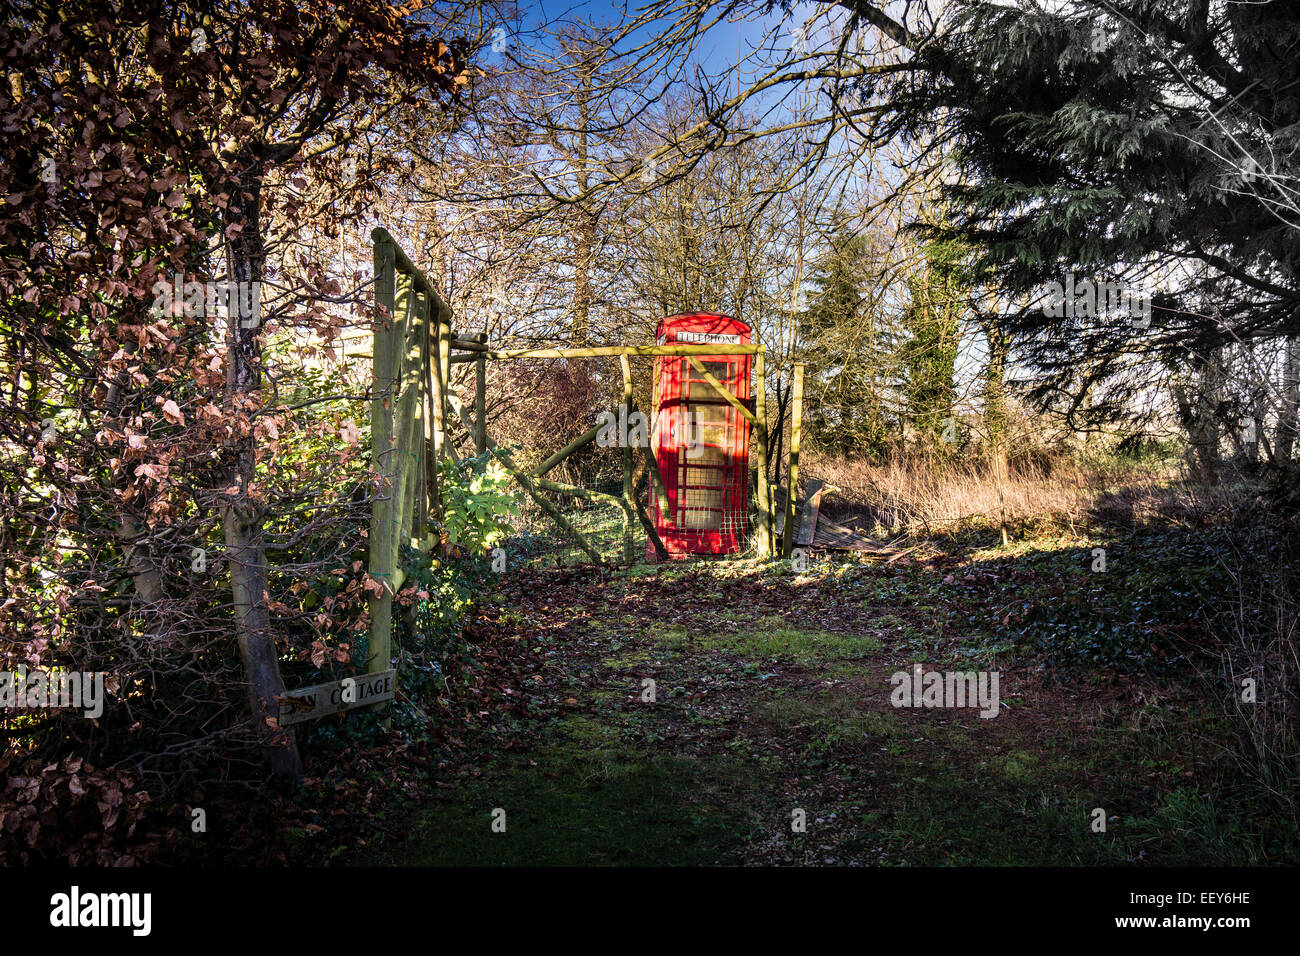 PHONEBOX IN GARDEN,TELEPHONE BOX, ABANDONED, COUNTRY GARDEN,WINTERS DAY, ENGLAND WARWICKSHIRE VILLAGE Stock Photo